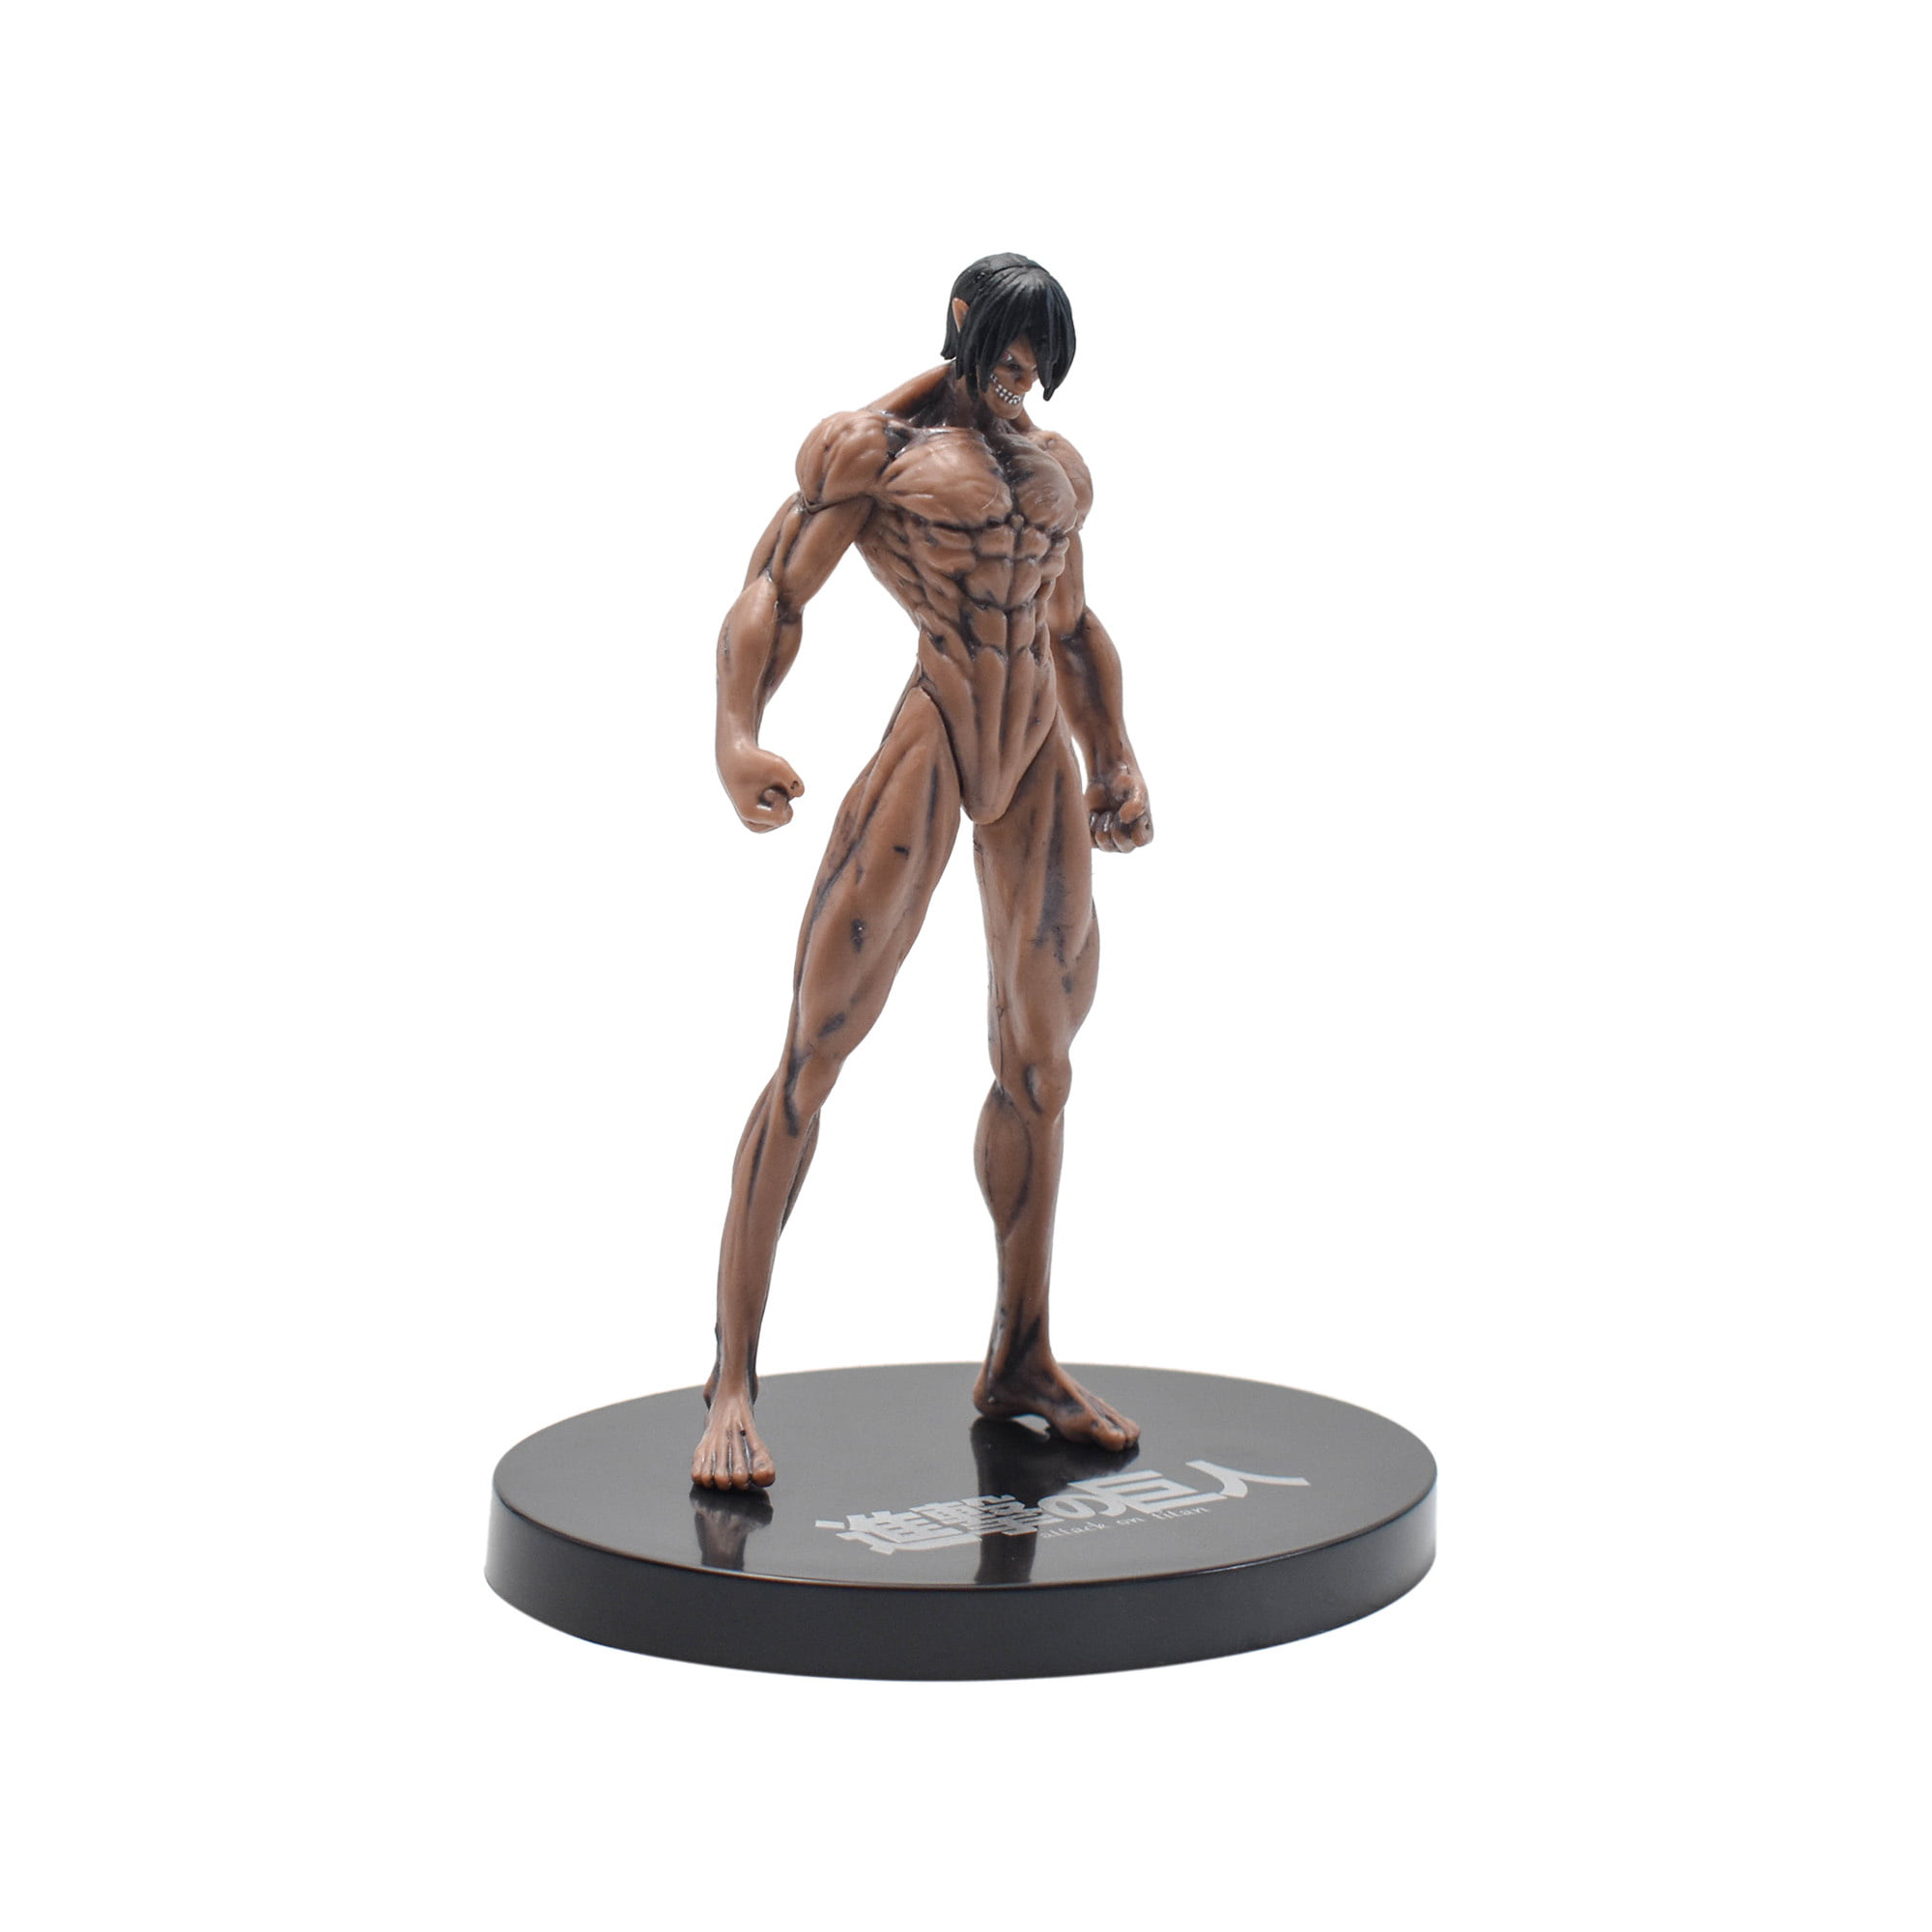 Details about   Attack On Titan Eren Jaeger Figure Anime Model Toy Action 